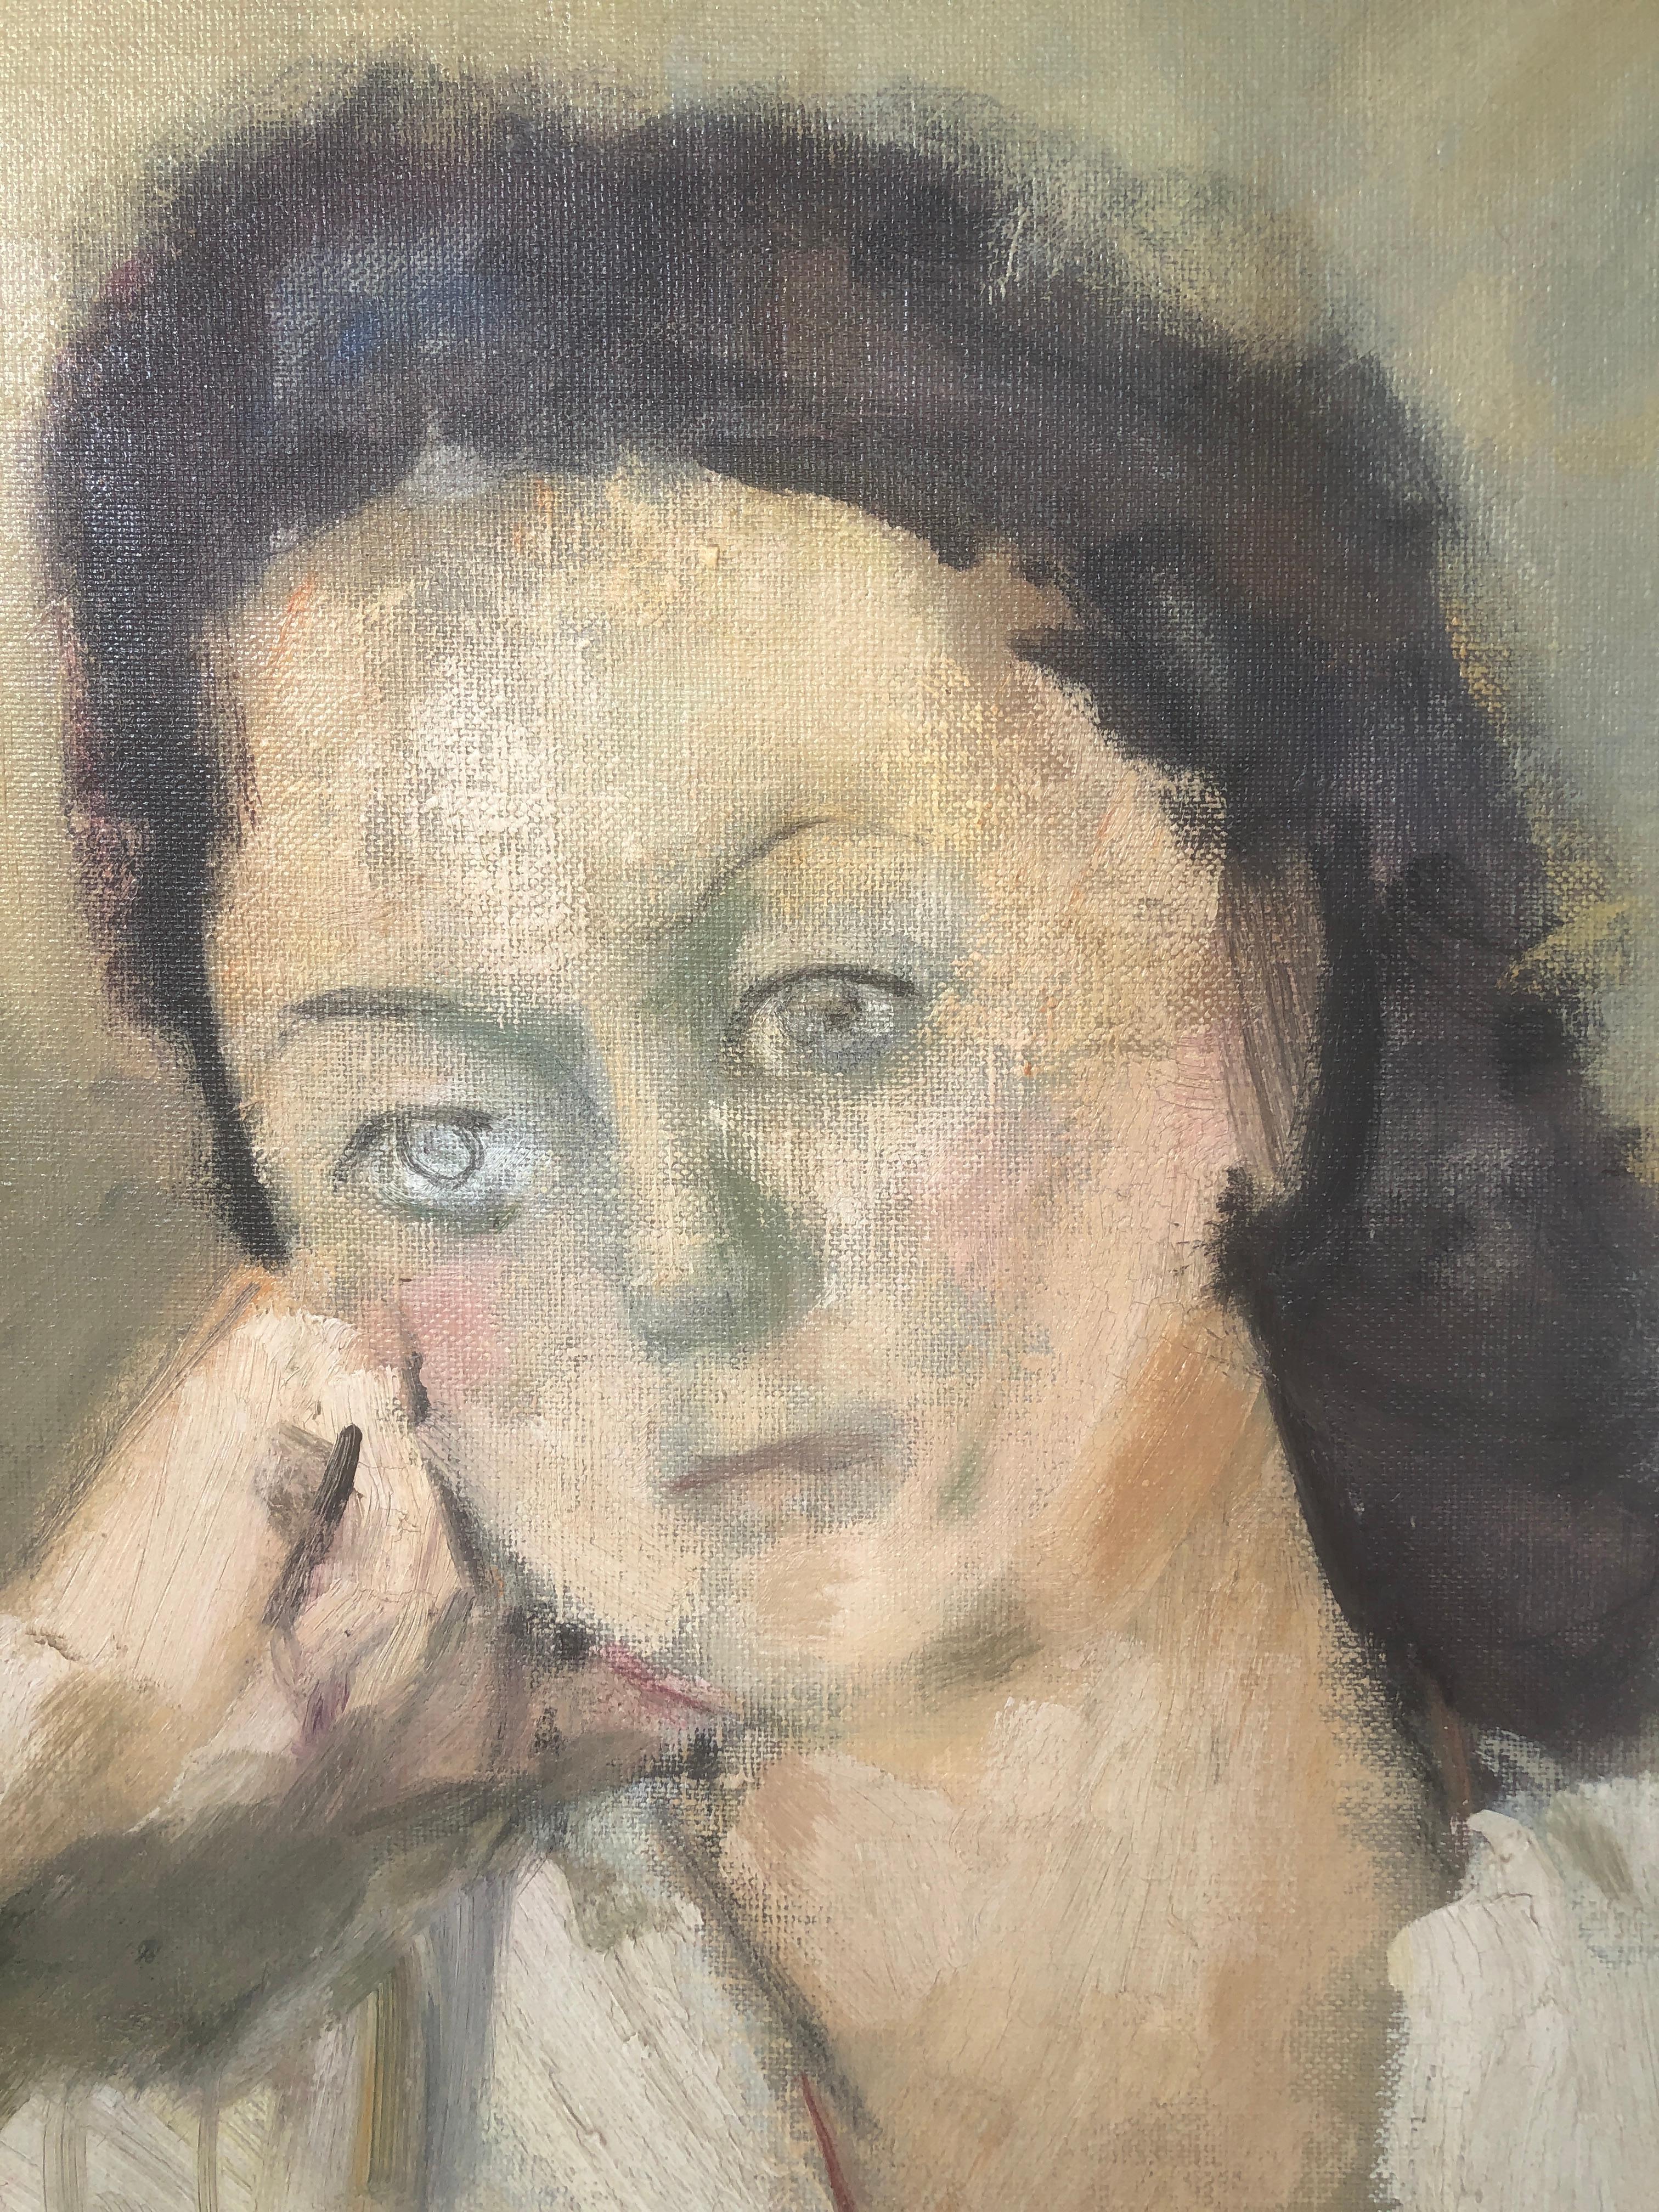 Ignasi Mundó Marcet (1918-2012) - woman in white - Oil on canvas
Canvas measures 73x60 cm.
Frame size 76x63 cm.

MUNDO Ignasi
Ignasi Mundó trained at the School of La Lonja, with Joaquín Mir, Mariano Pidelaserra and Manolo Hugué. In 1945 he received